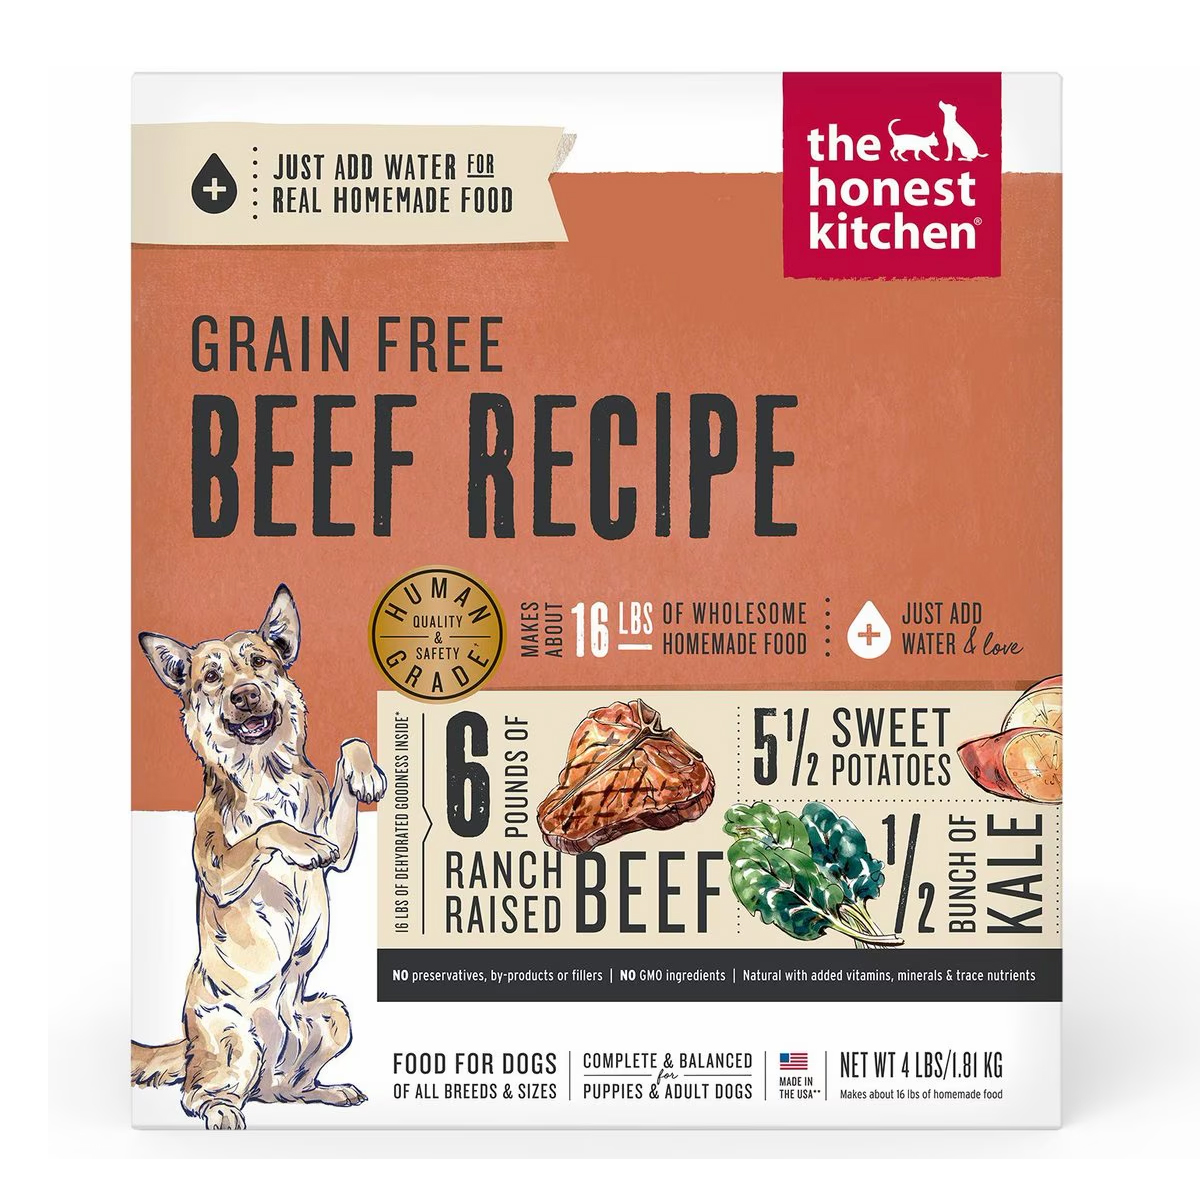 The Honest Kitchen Beef Recipe Grain-Free Dehydrated Dog Food